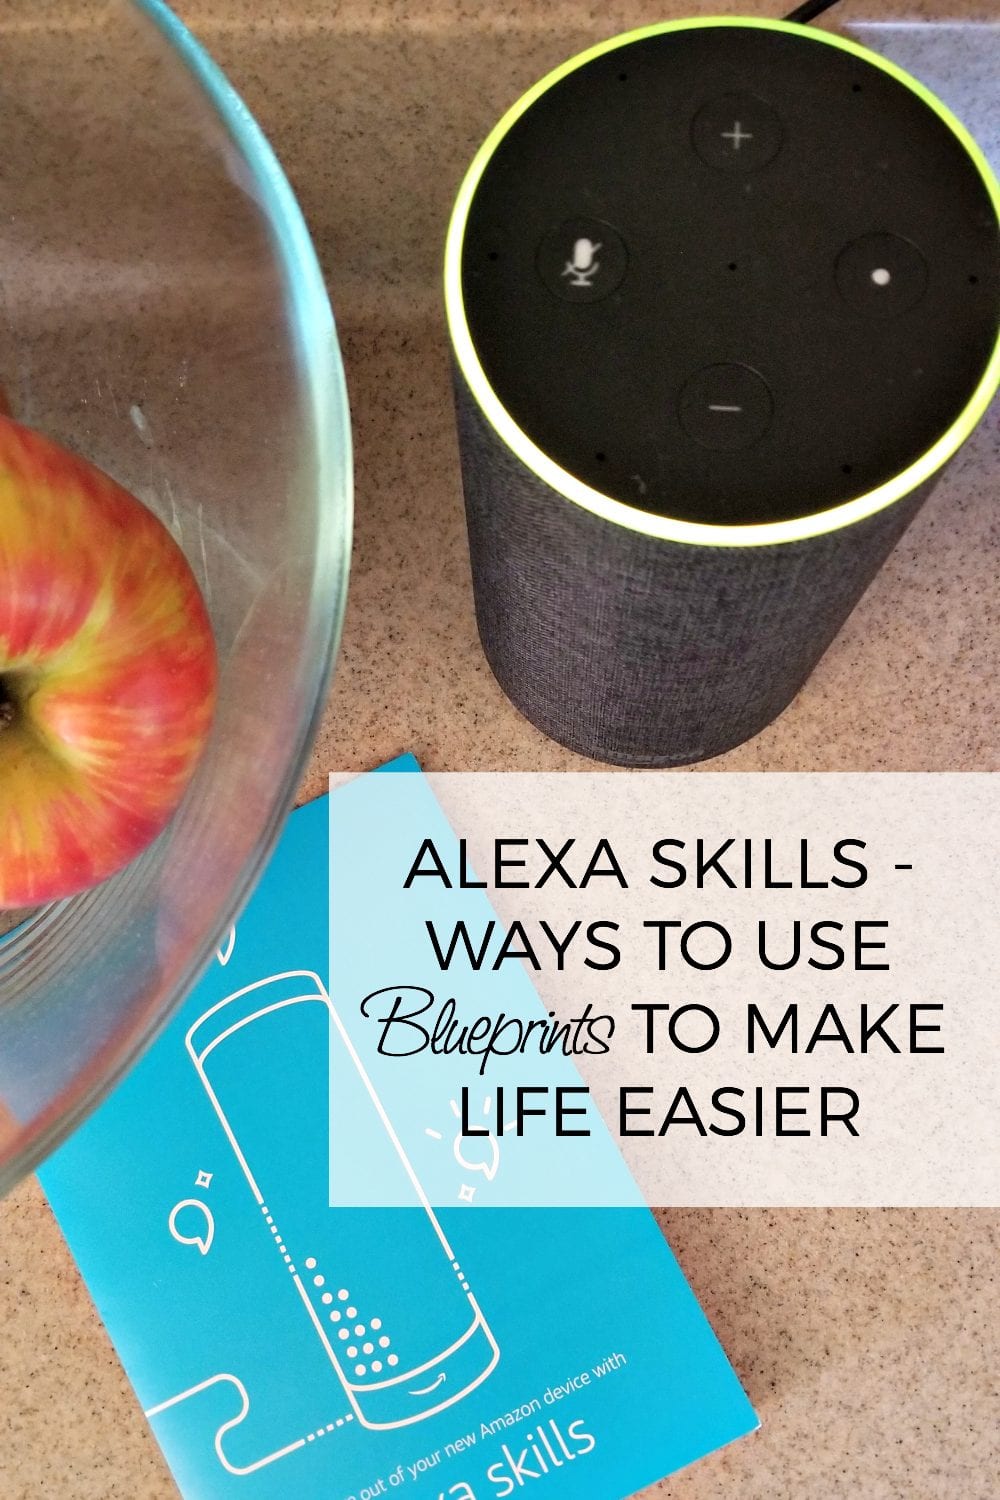 Alexa on the counter with apples.